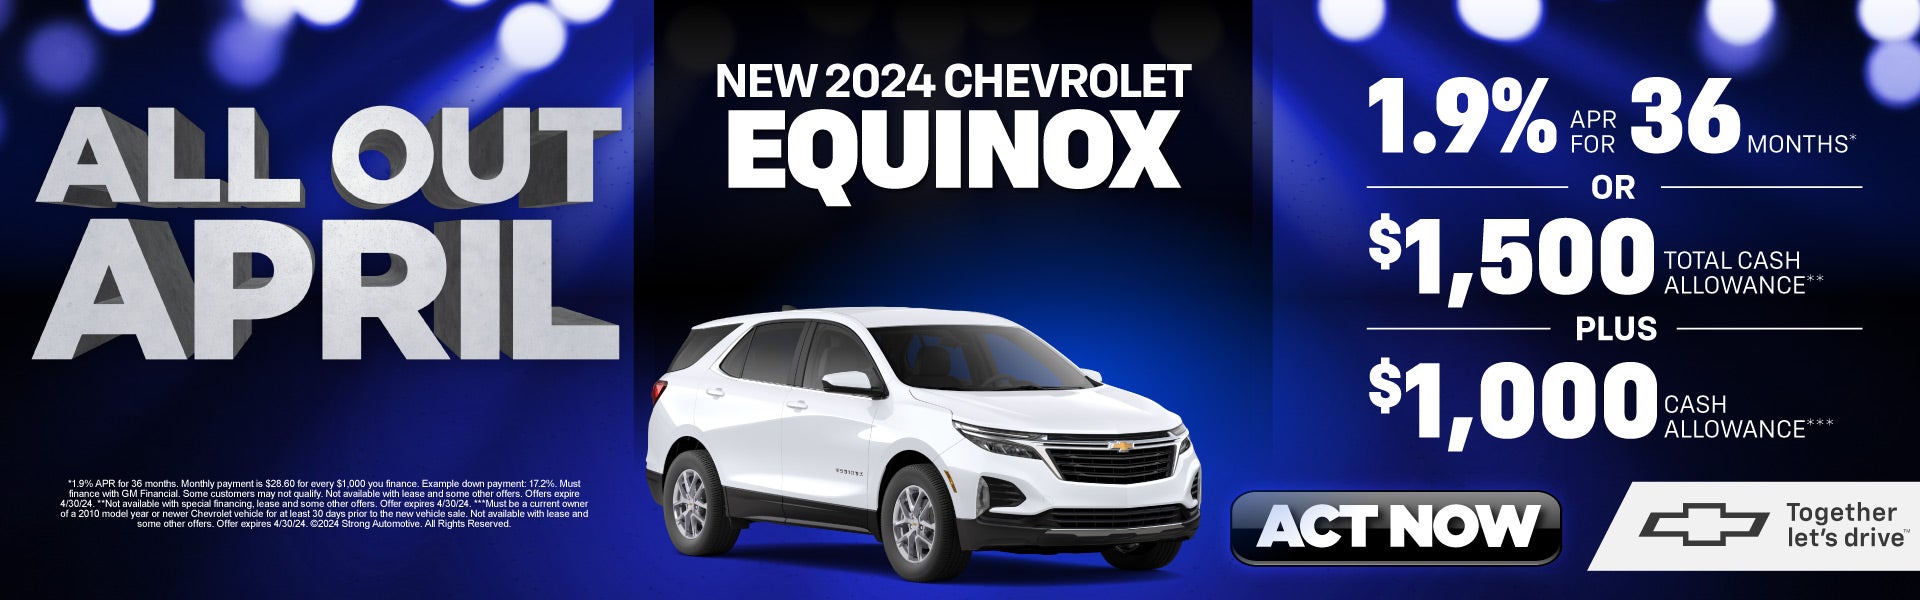 2024 chevy equinox 1.9% apr for 36 mos. act now